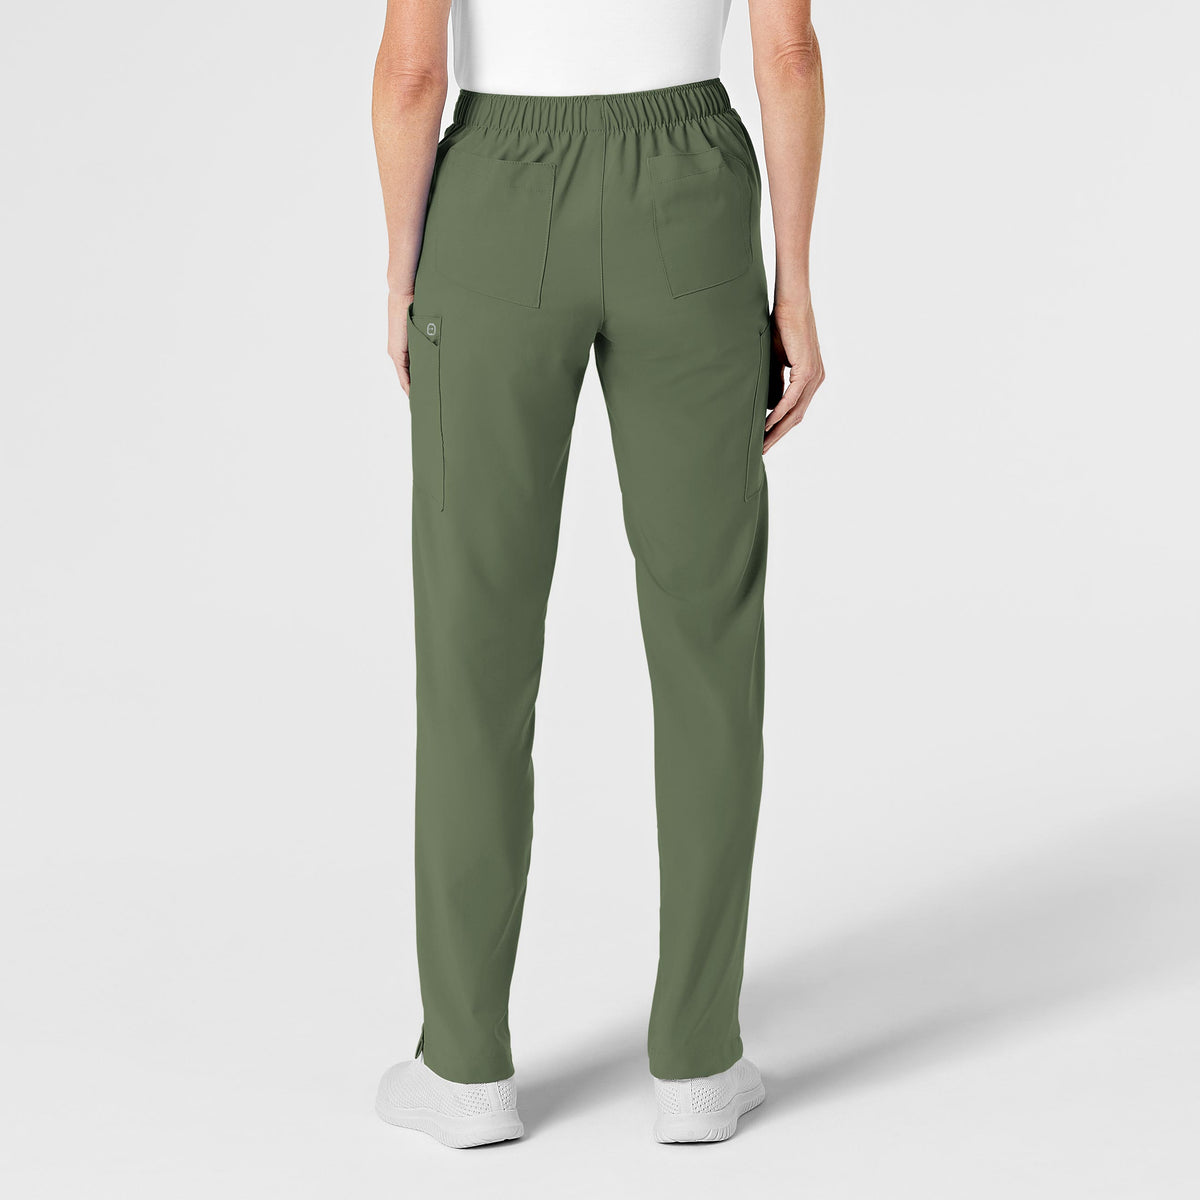 W123 Women's Flat Front Cargo Scrub Pant Olive back view